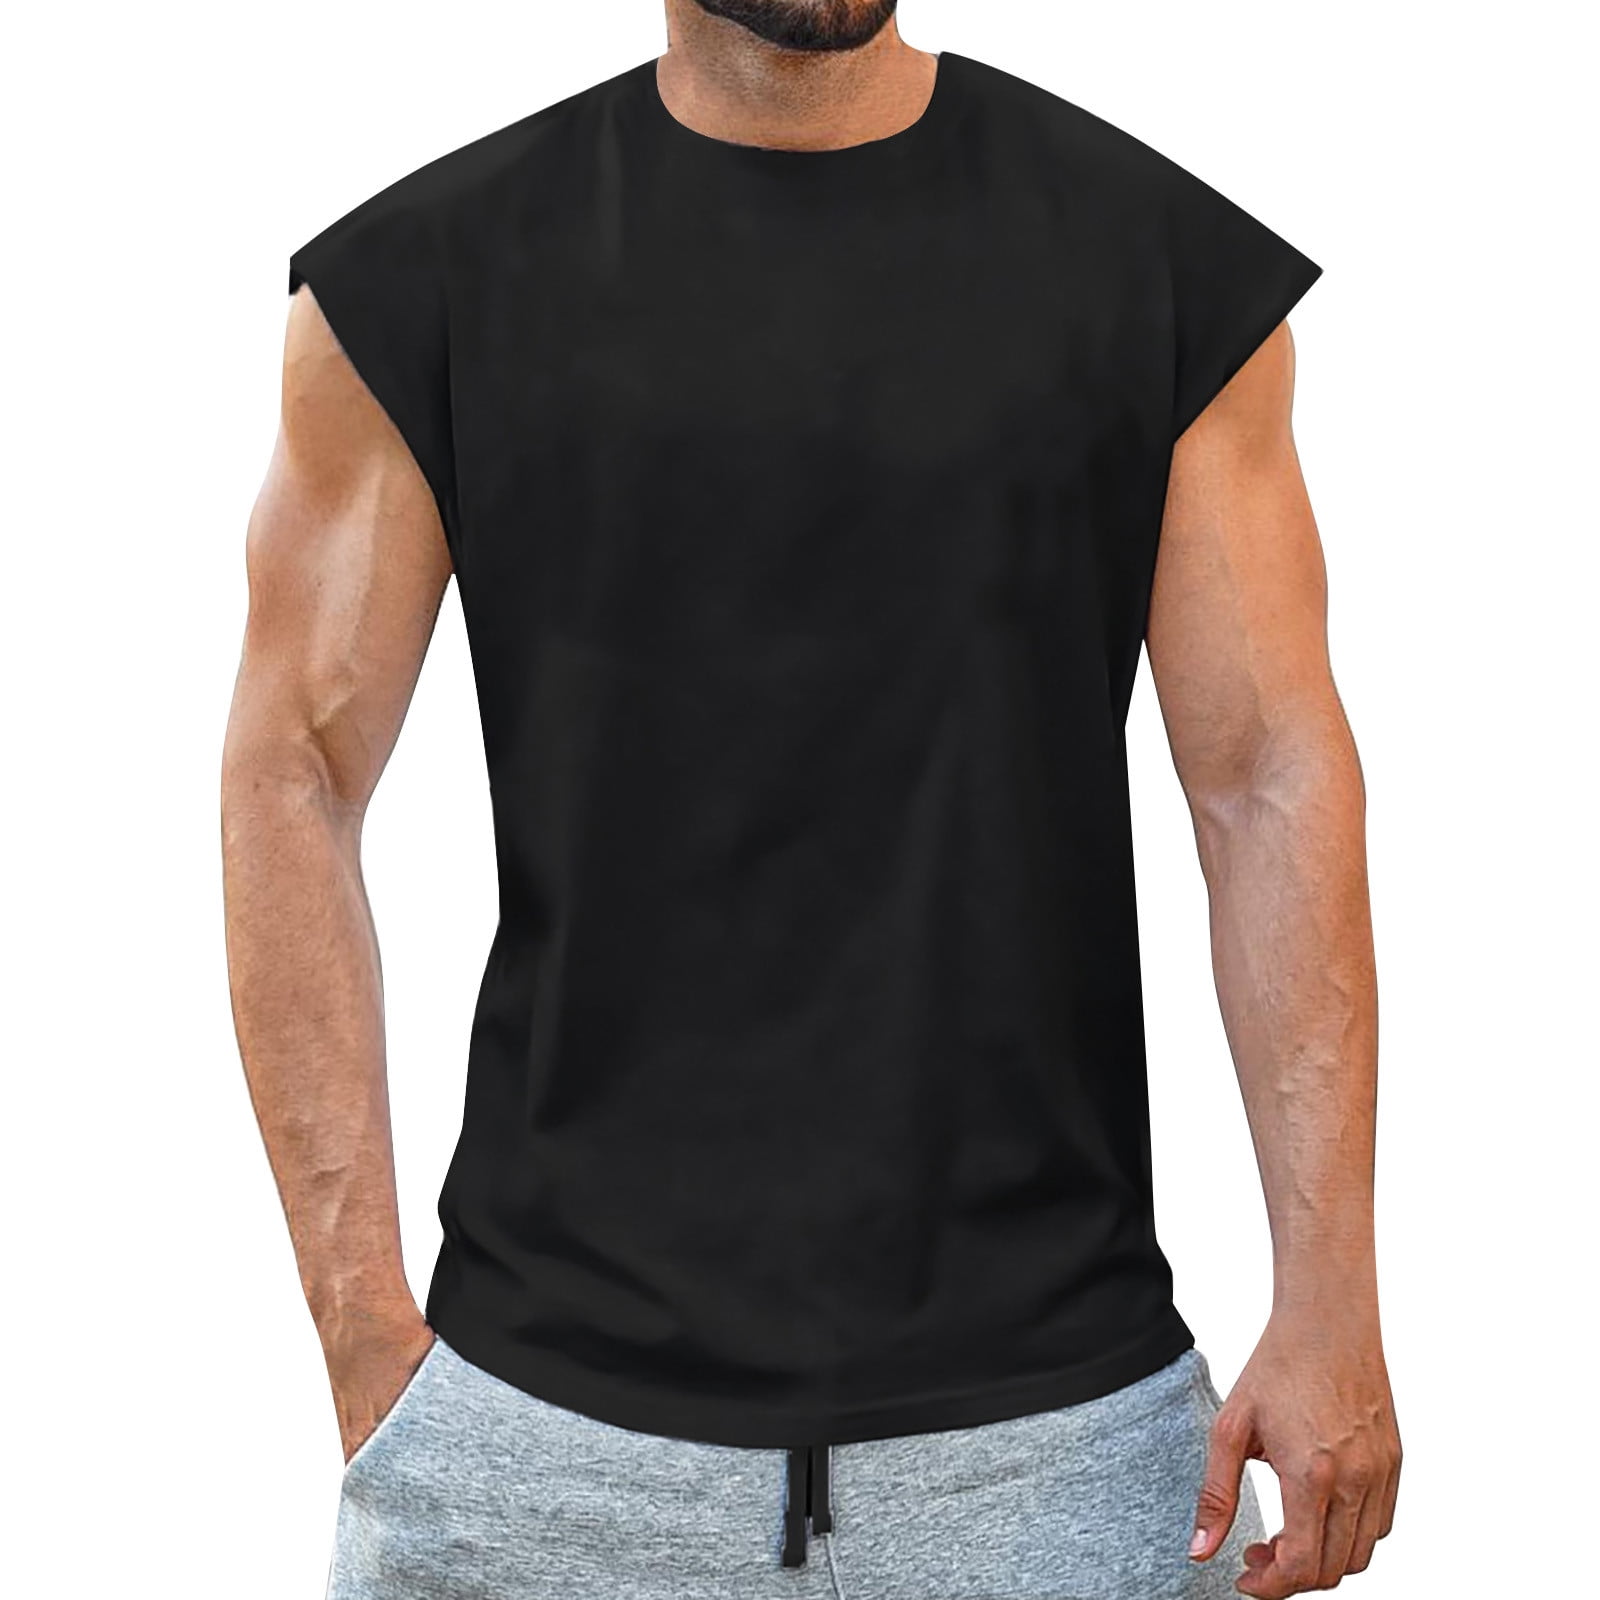 Men's Compression Tank Tops Slim Fit Athletic Muscle Tees Fitness  Sleeveless T-Shirt Cotton Breathable Sport Vest 